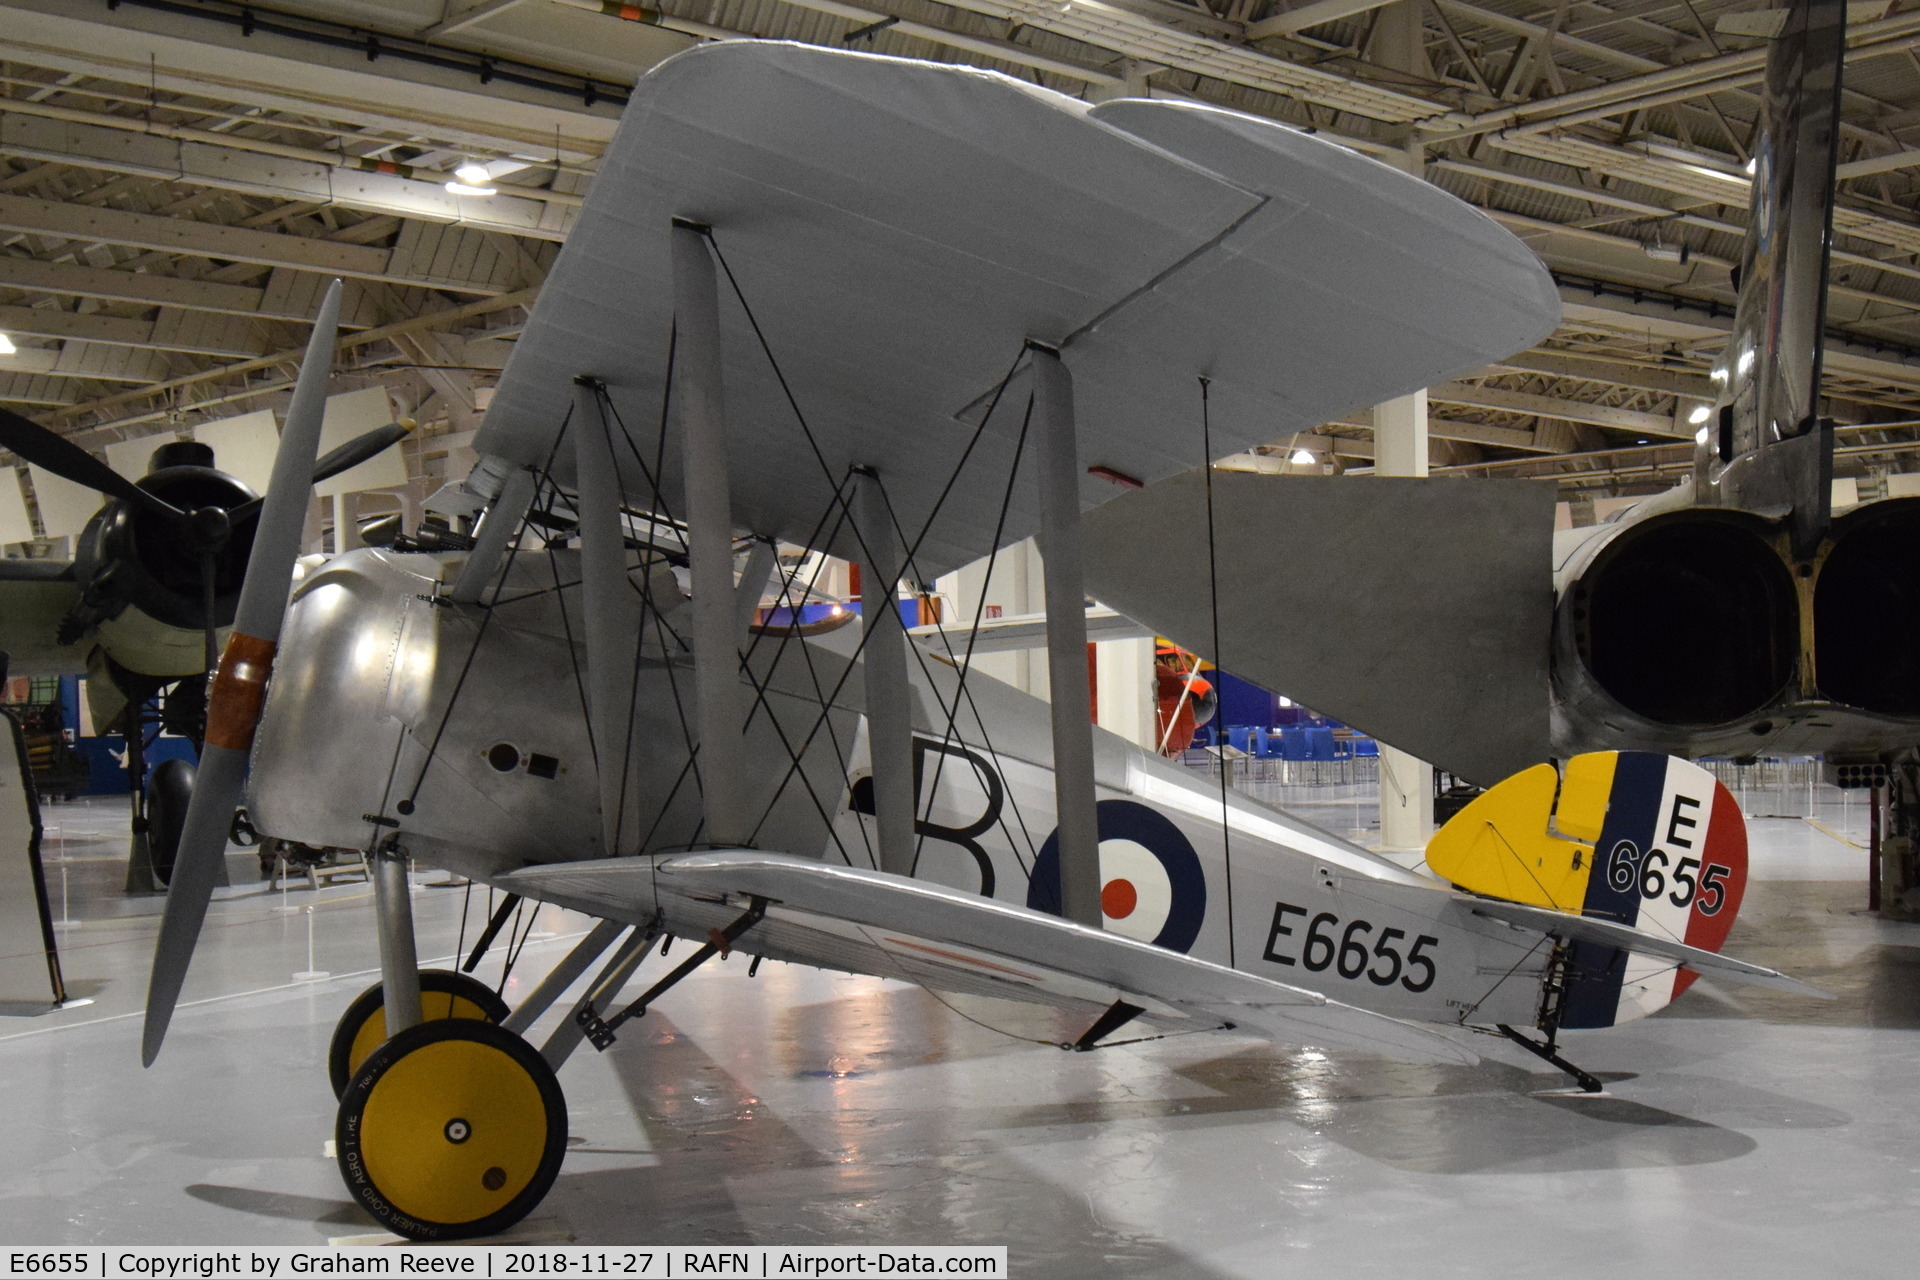 E6655, Sopwith Snipe 7F.1 Replica C/N Not found E6655, On display at the RAF Museum, Hendon.